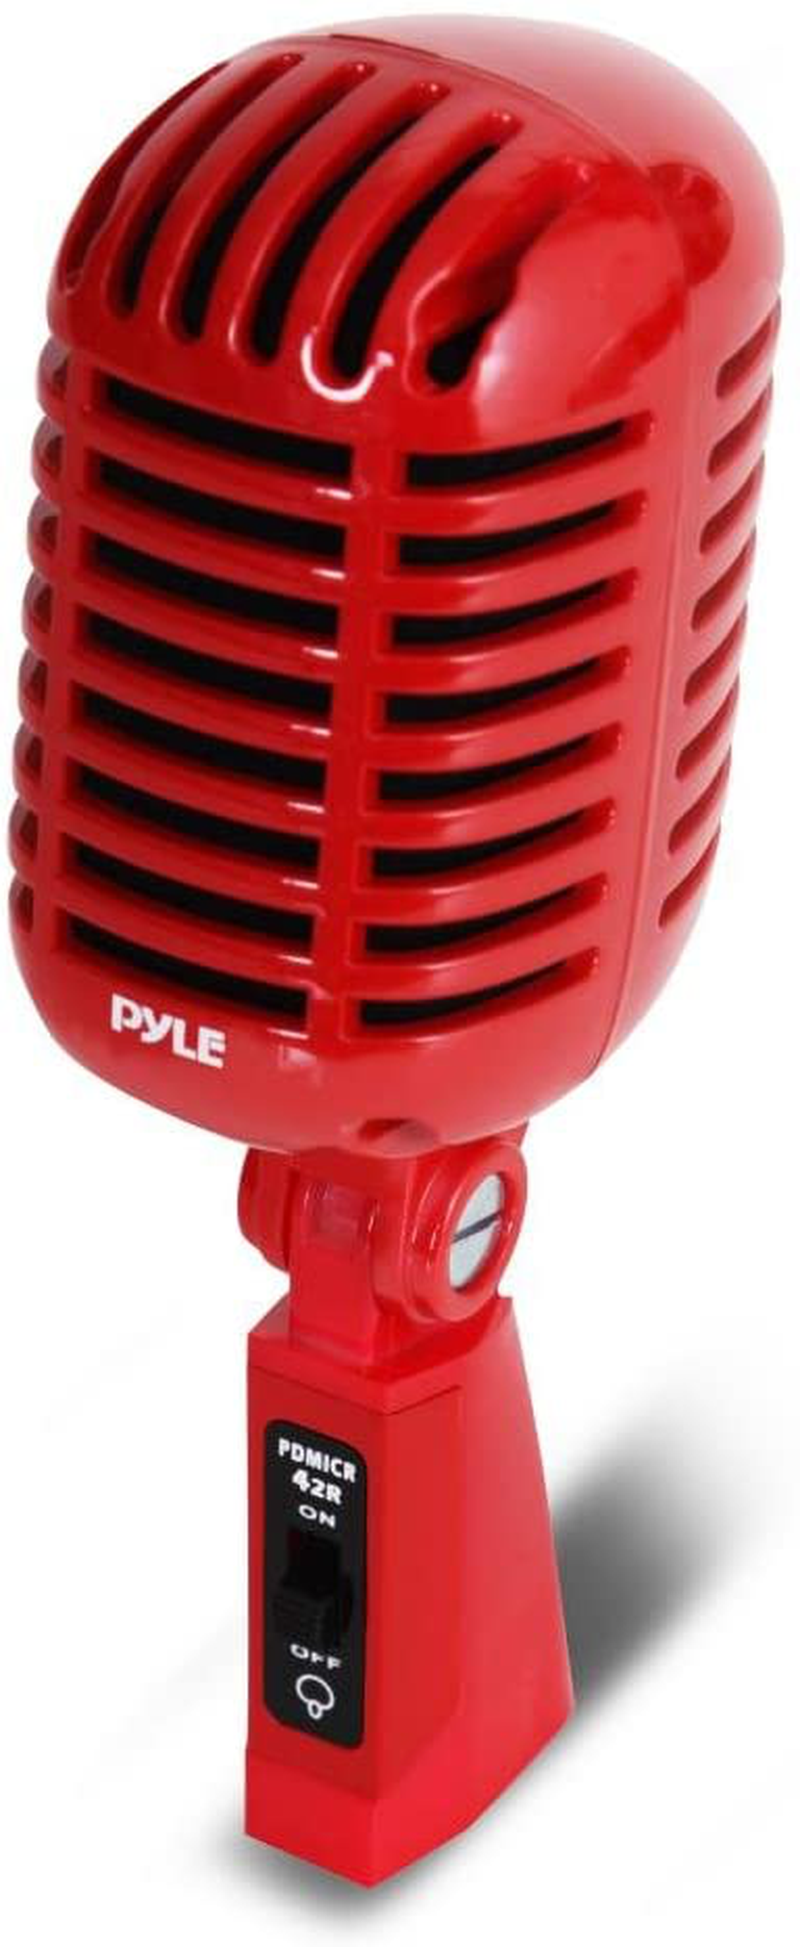 Classic Retro Dynamic Vocal Microphone - Old Vintage Style Unidirectional Cardioid Mic with XLR Cable - Universal Stand Compatible - Live Performance In Studio Recording - Pyle PDMICR42SL (Silver) Electronics > Audio > Audio Components > Microphones Pyle Red Microphone 